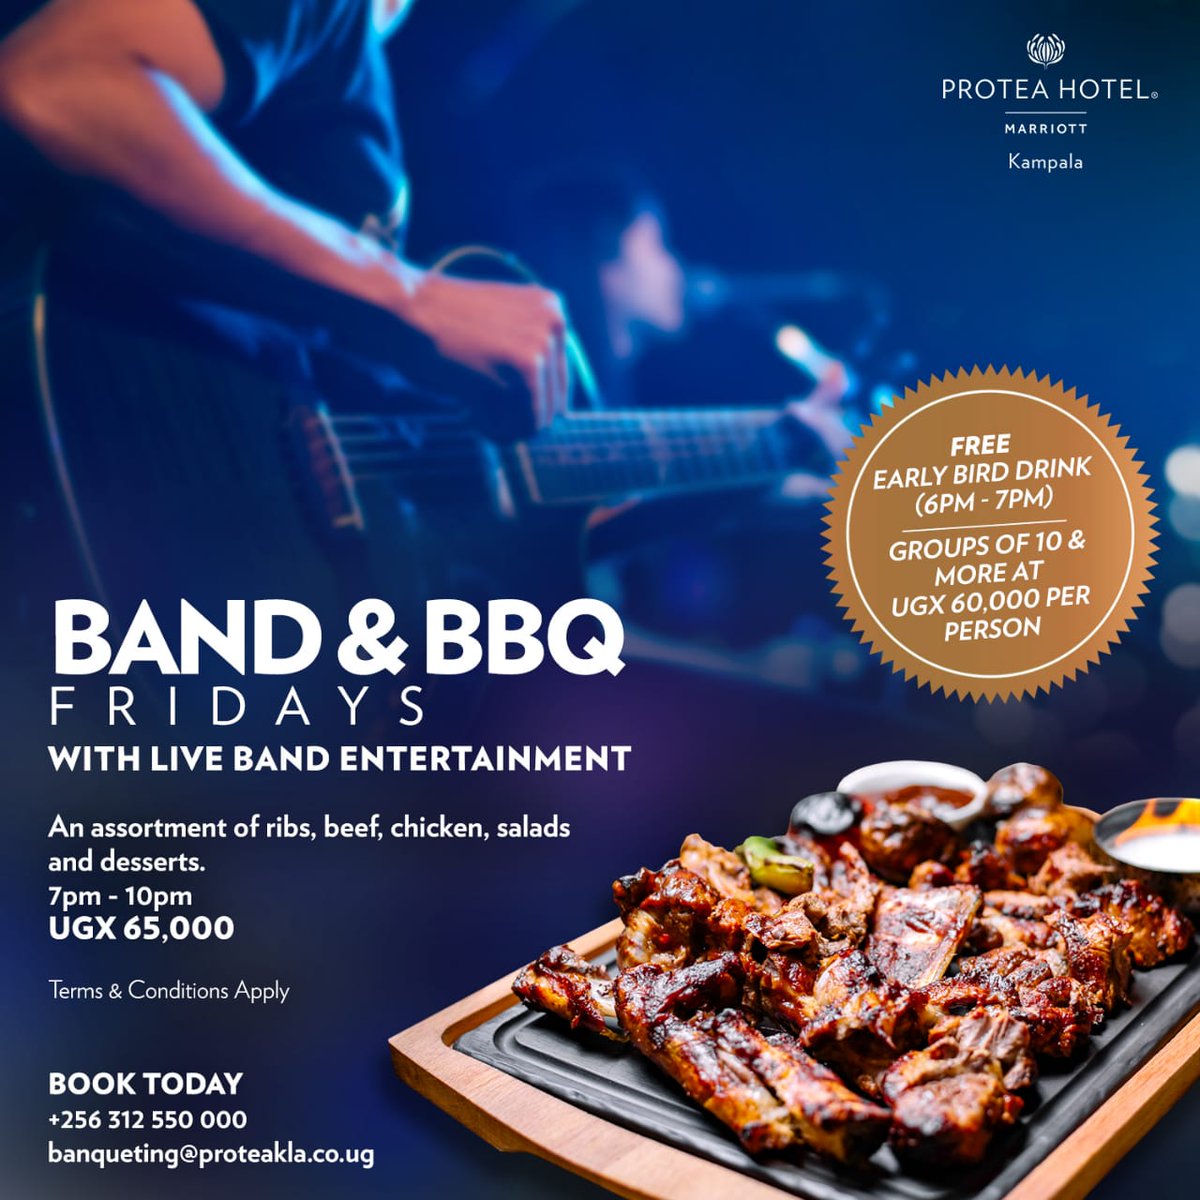 Live music is a beautiful way to start the weekend! Enjoy a free cocktail on us, between 6pm to 7pm.

Call us now to reserve the perfect table!

#proteakampala #marriotthotels #proteahotels